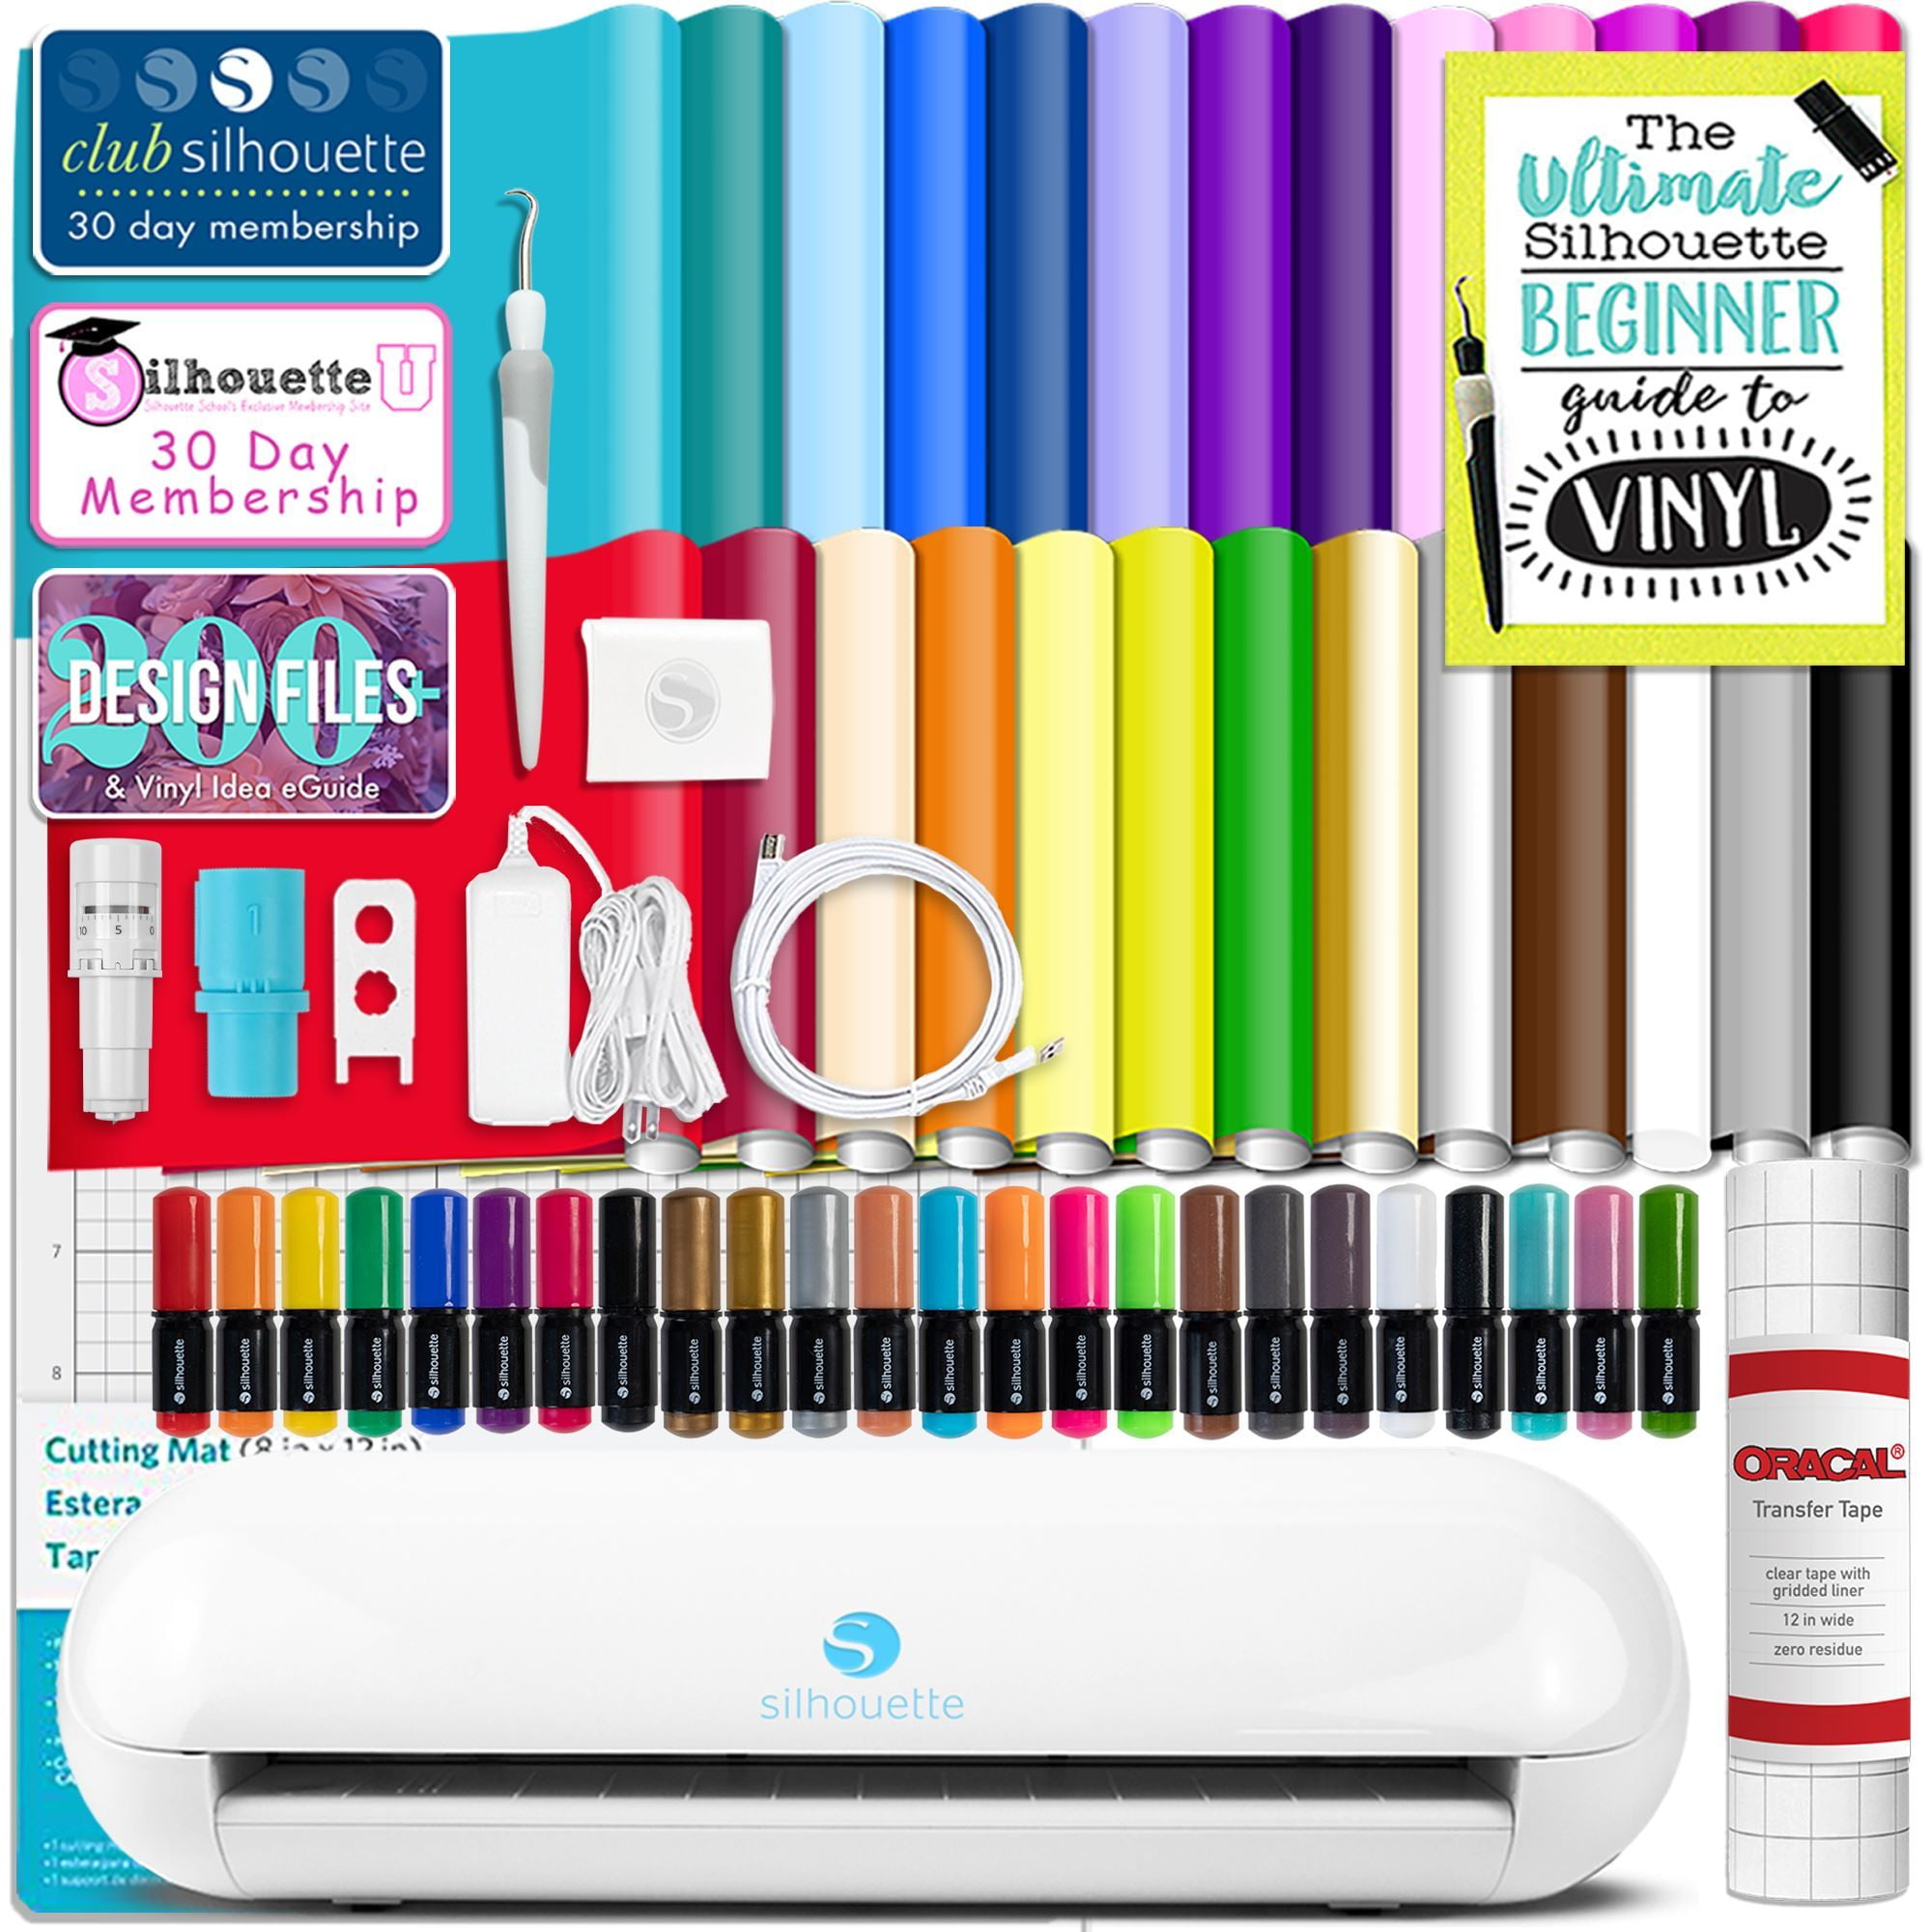 24 Sketch Pens Guides Silhouette Black Cameo 4 w/ 26 Oracal Glossy Sheets 